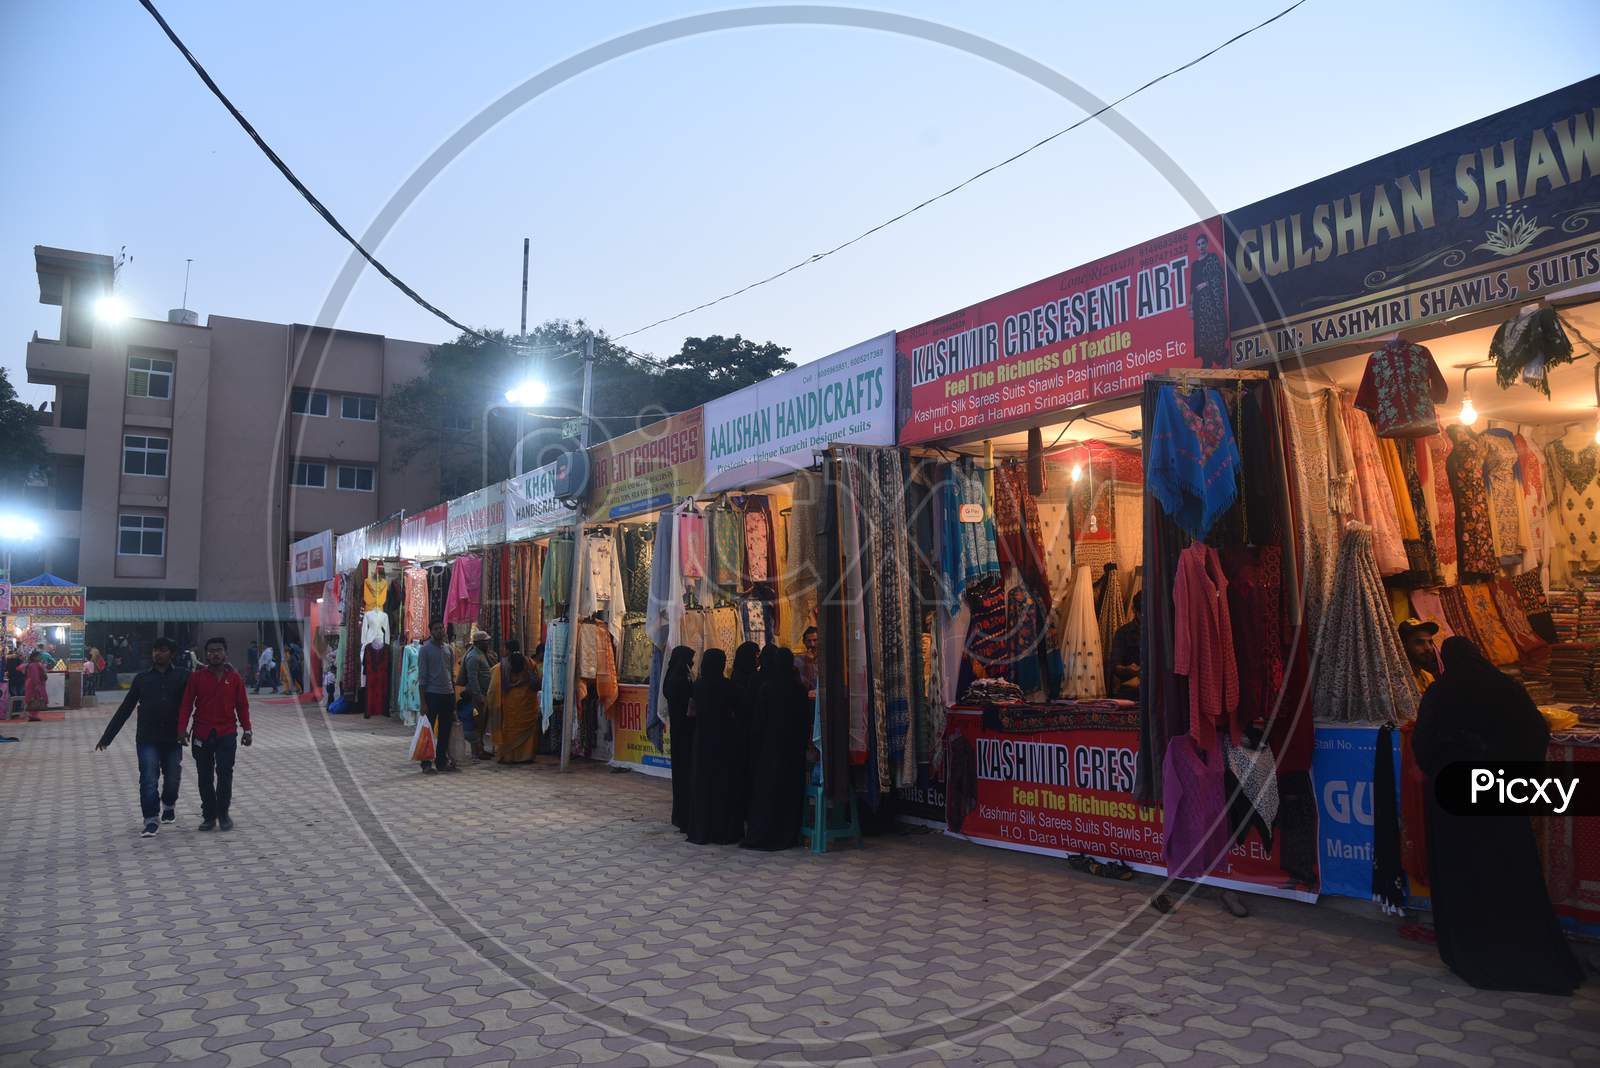 Kashmiri Shawls and Clothes stalls in Numaish Exhibition,Nampally